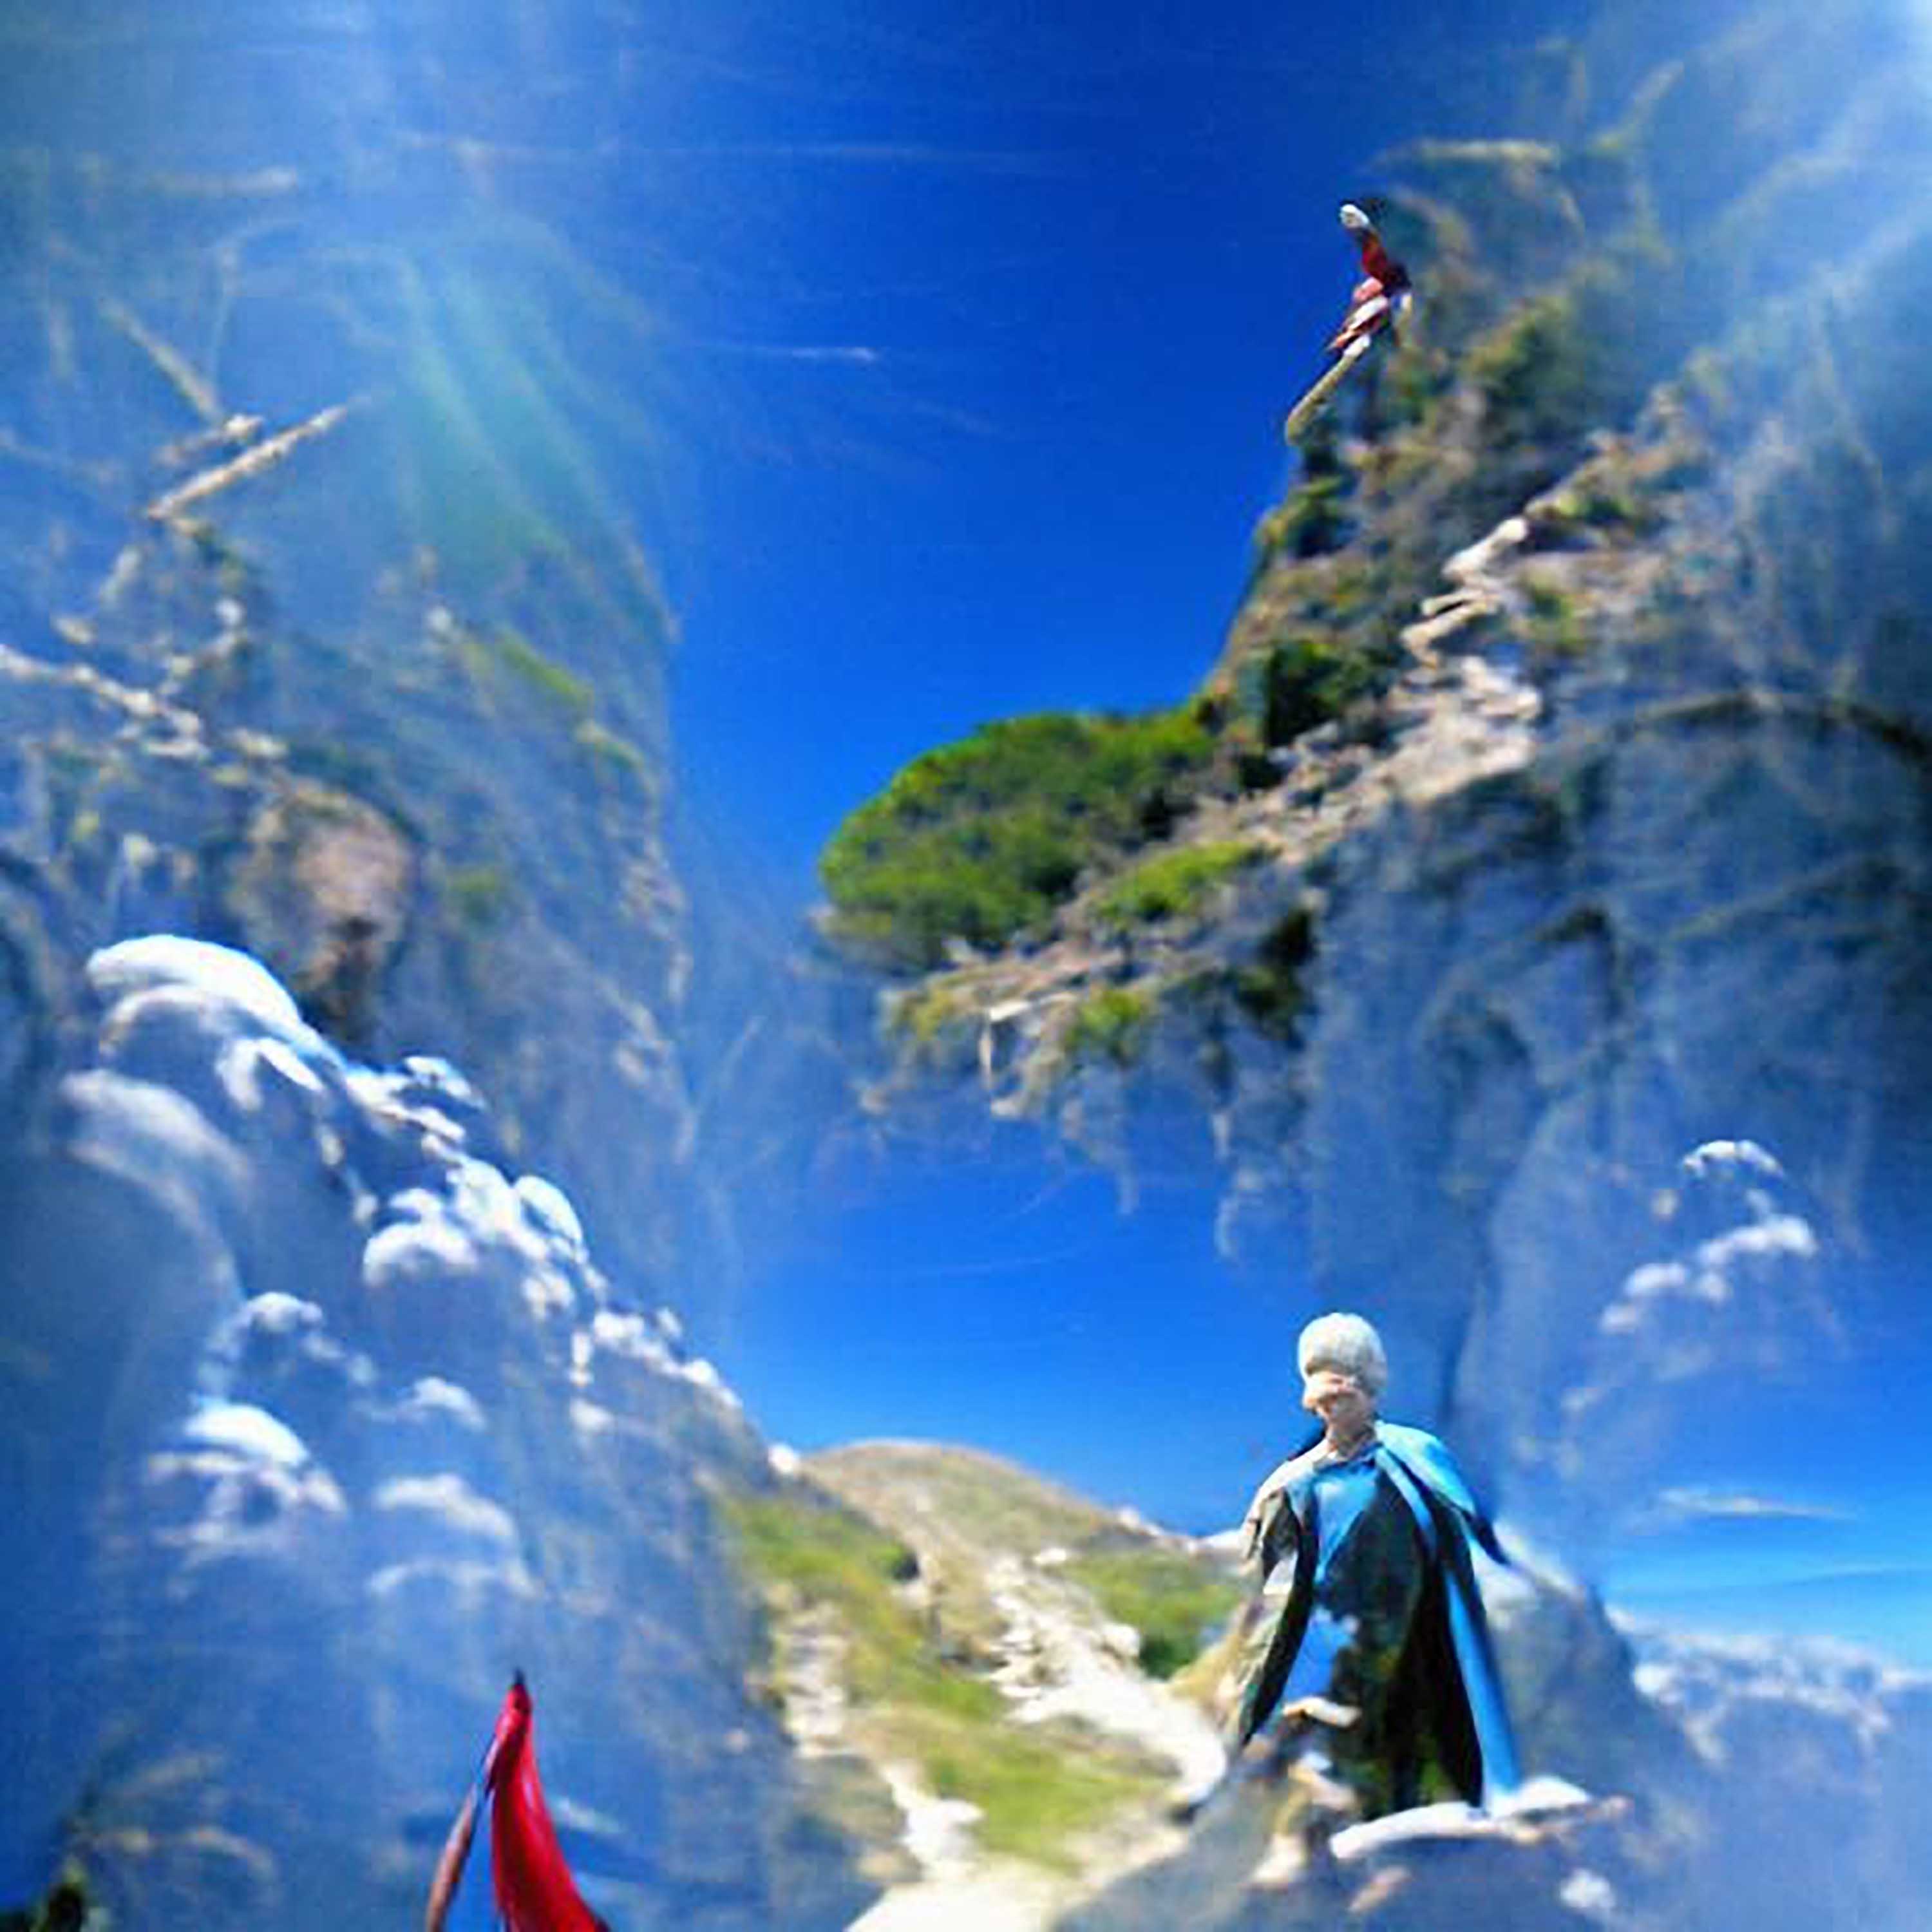 #102 - "Dante’s descent into the end of the trail leading up to well over the peak and below the sea, a sky so blue and beautiful you would all die instantly if you could see it"